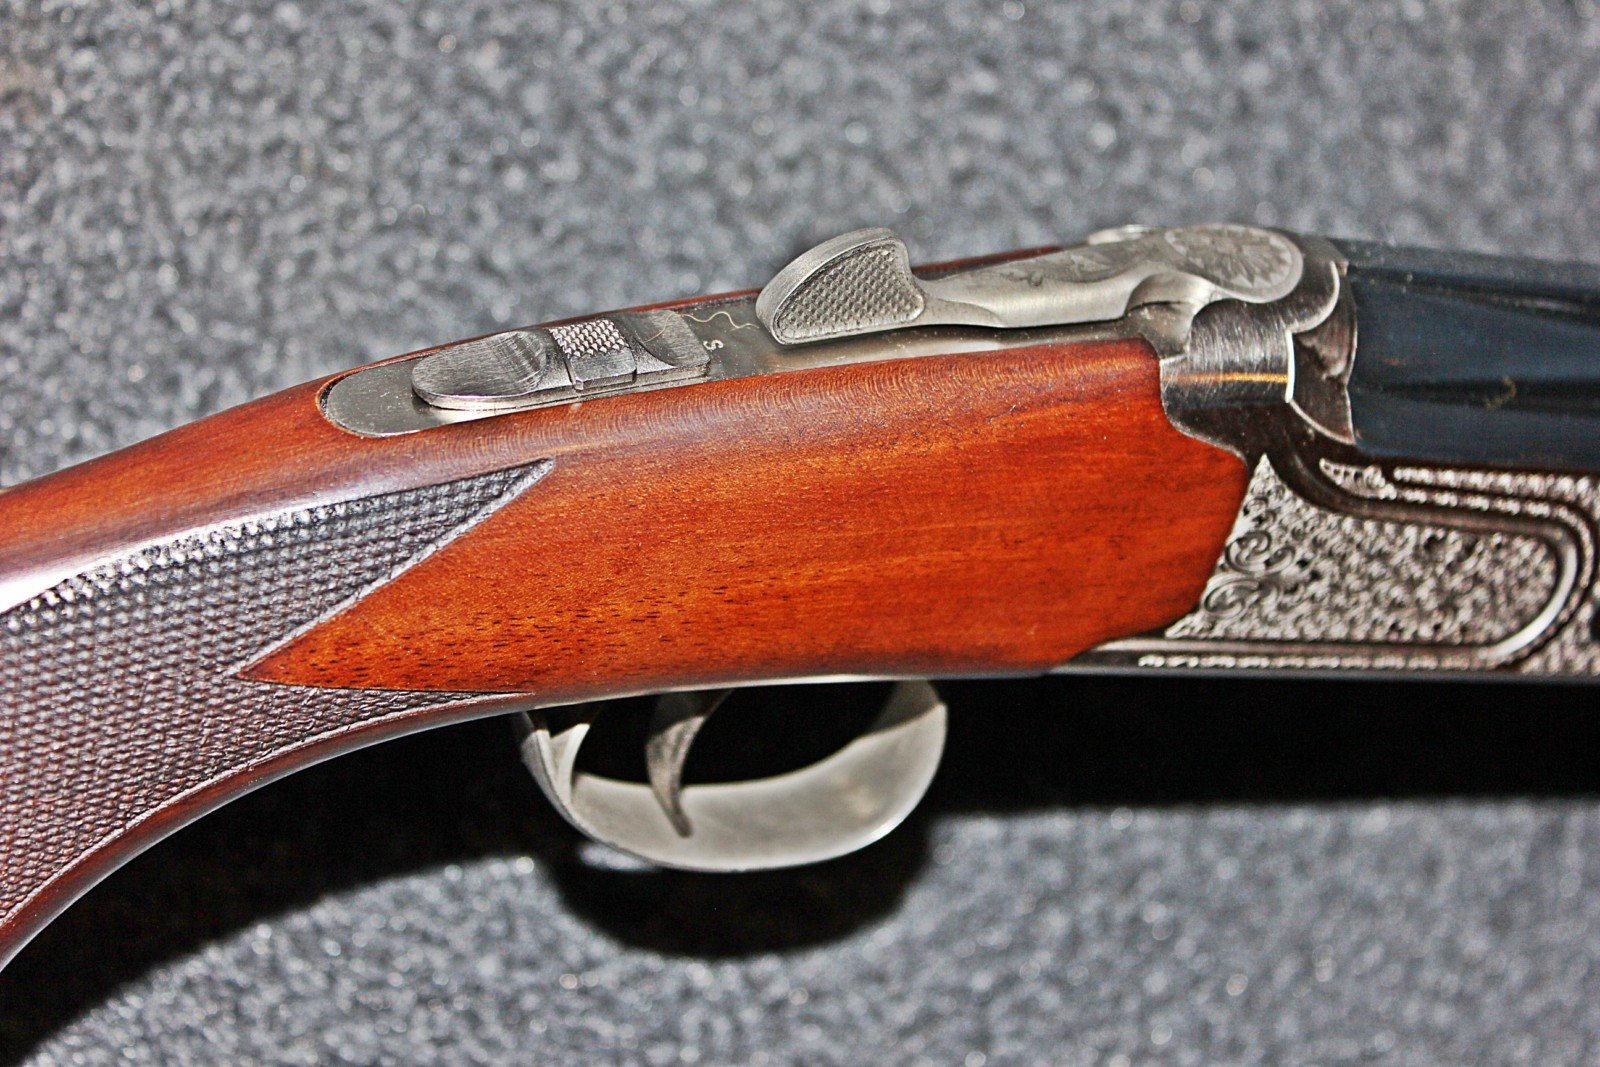 cut-checkered grips and forends